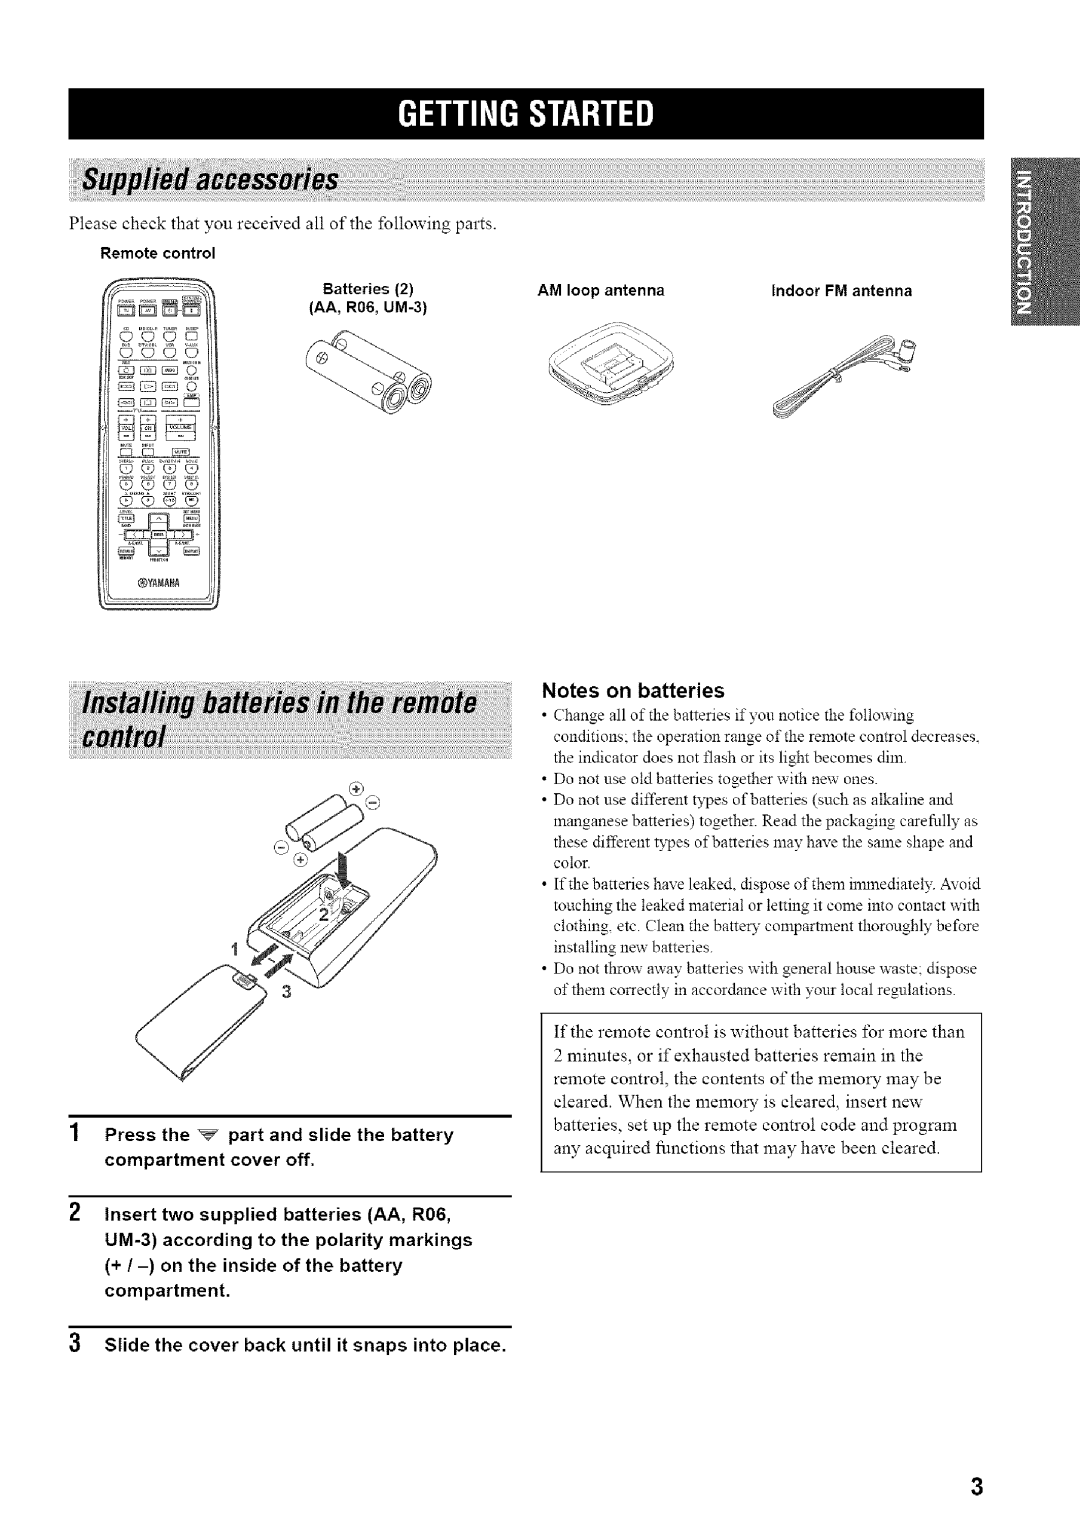 Yamaha HTR-5835 owner manual Pleasecheckthatyoureceivedallofthefollowingparts, Notes on batteries, compartment cover off 